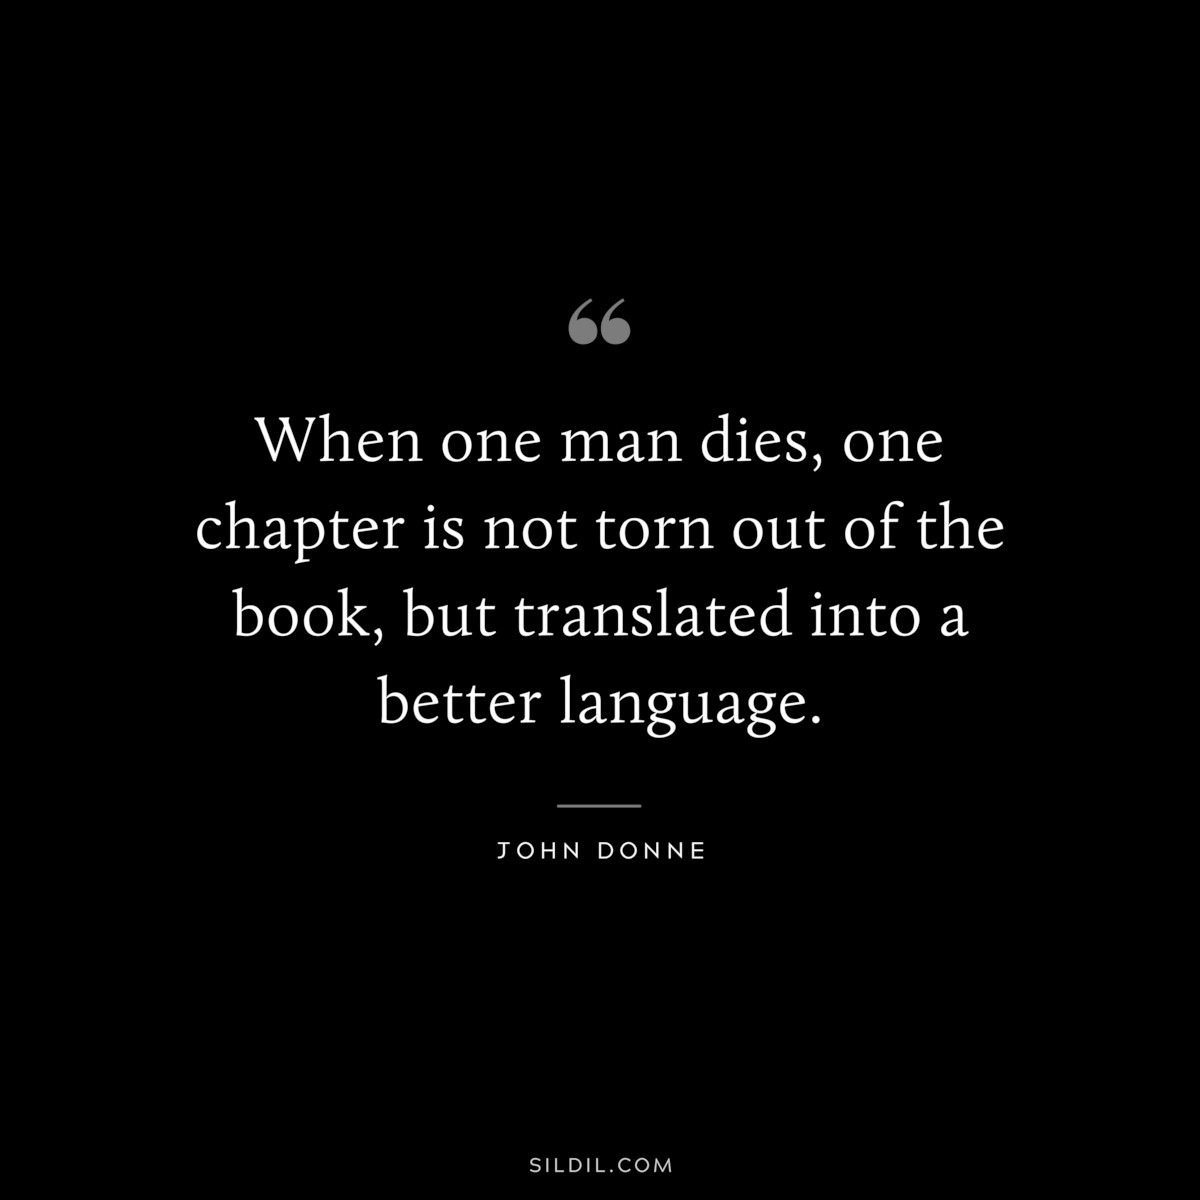 When one man dies, one chapter is not torn out of the book, but translated into a better language. ― John Donne